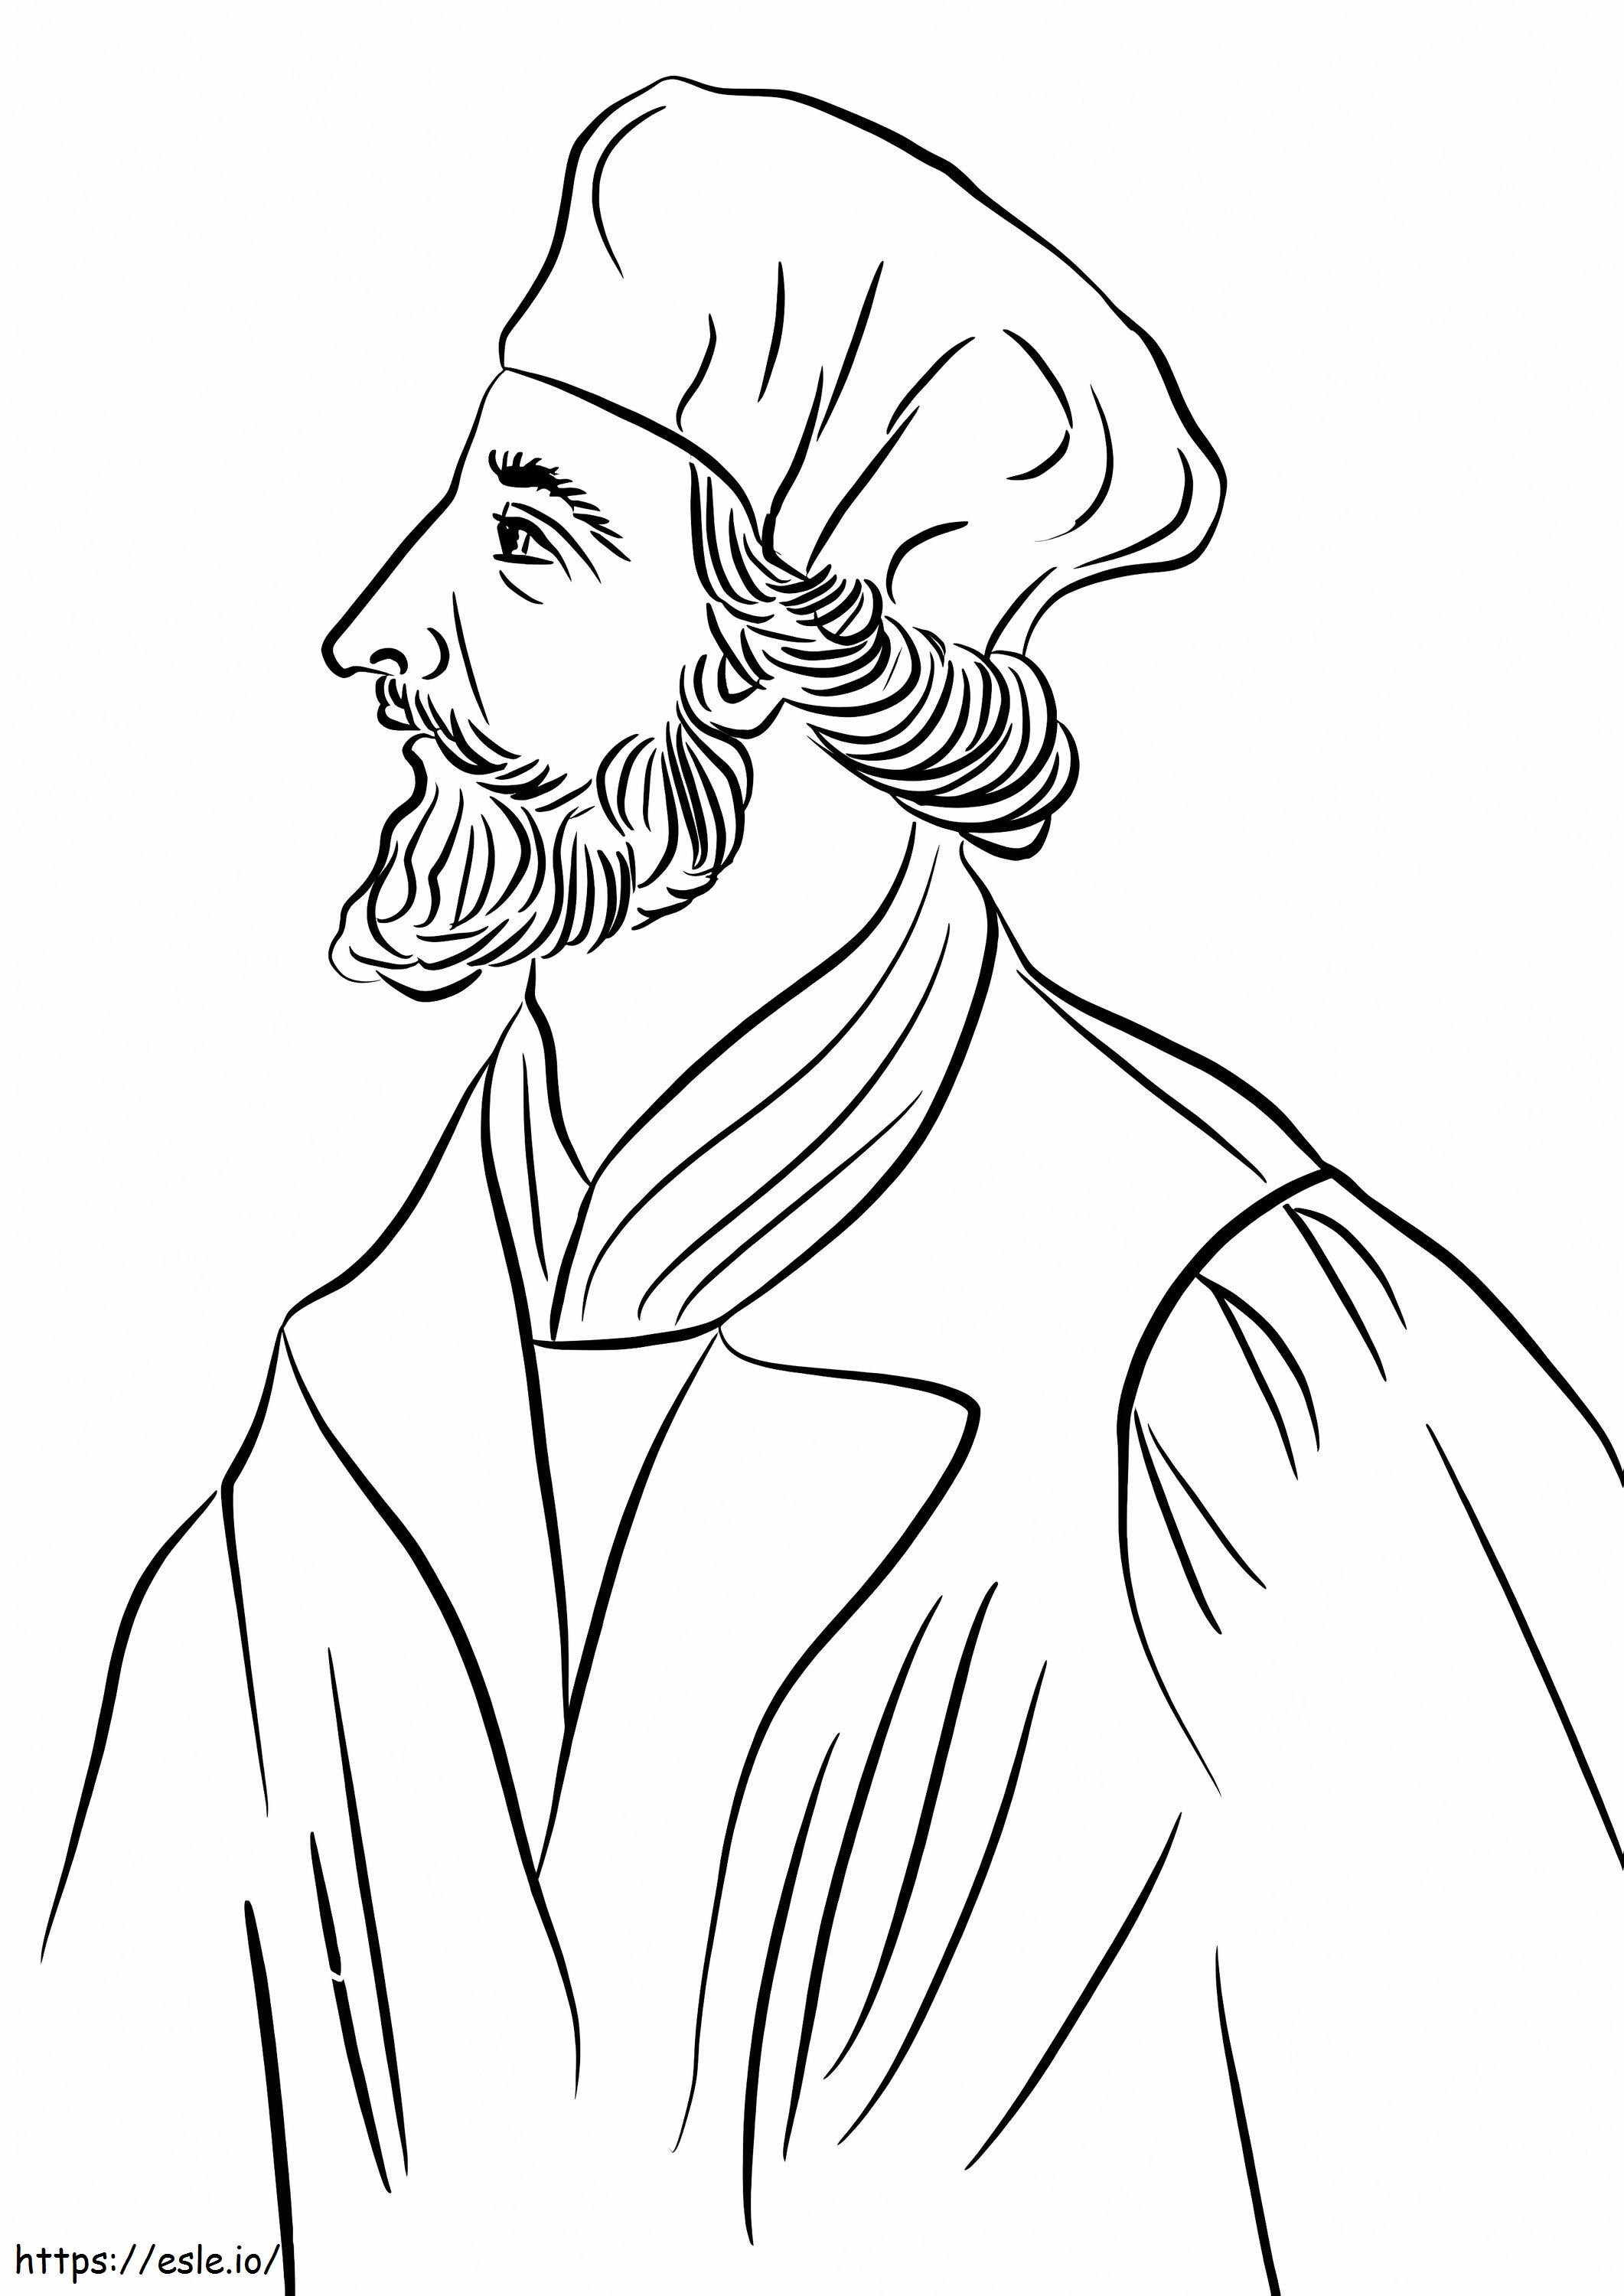 John House coloring page